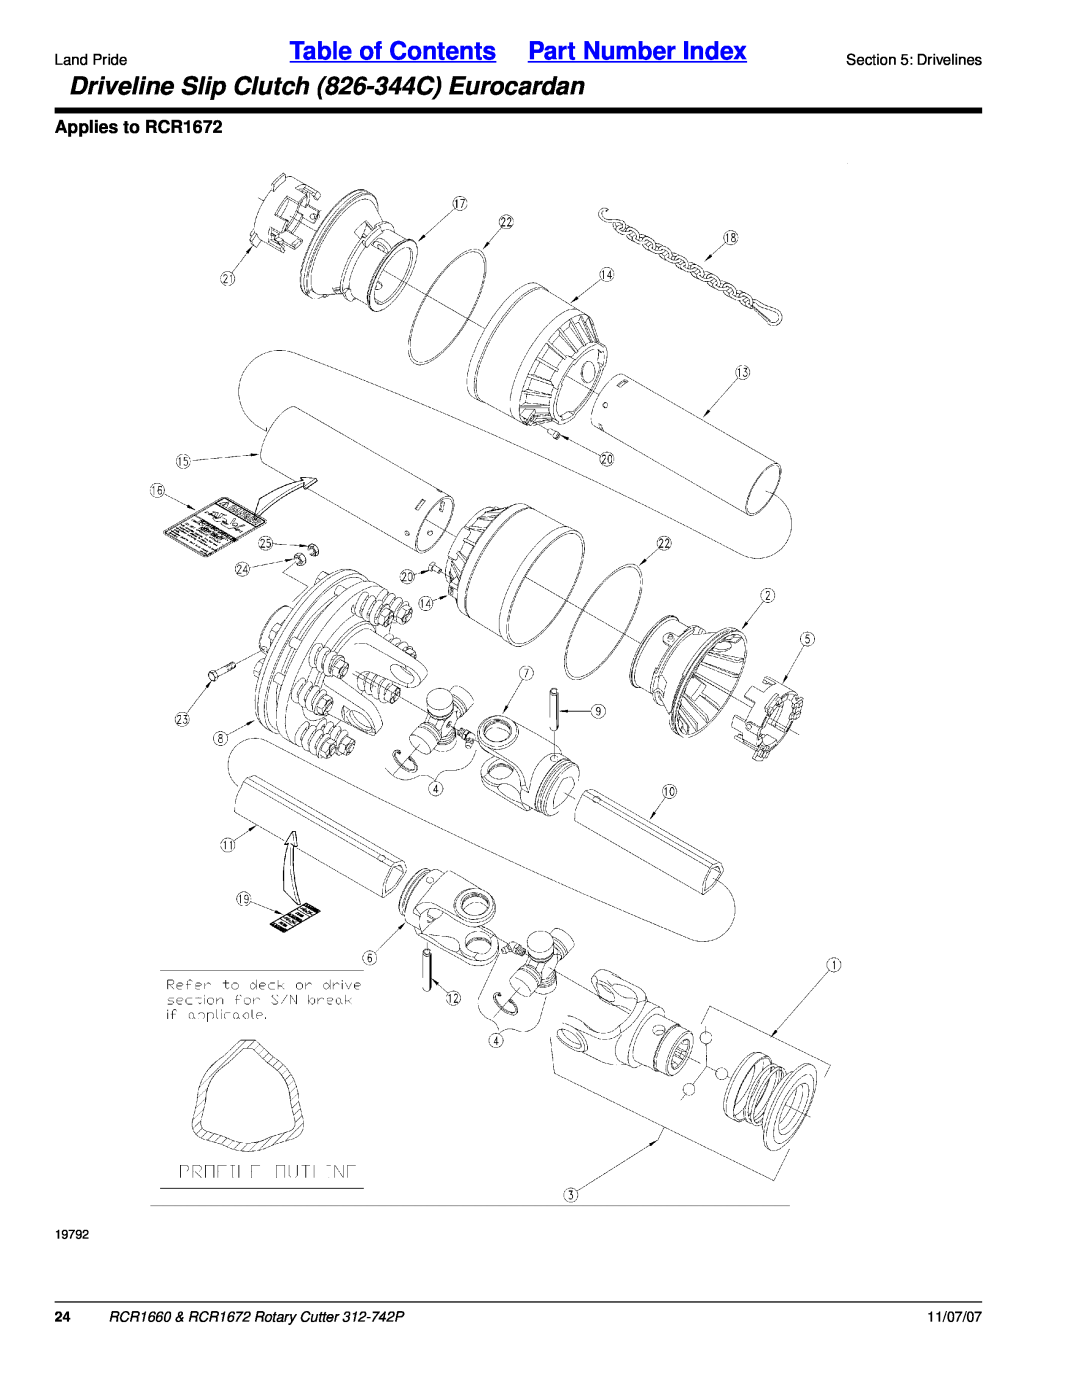 Land Pride RCR1660 manual Driveline Slip Clutch 826-344CEurocardan, Table of Contents Part Number Index, Applies to RCR1672 